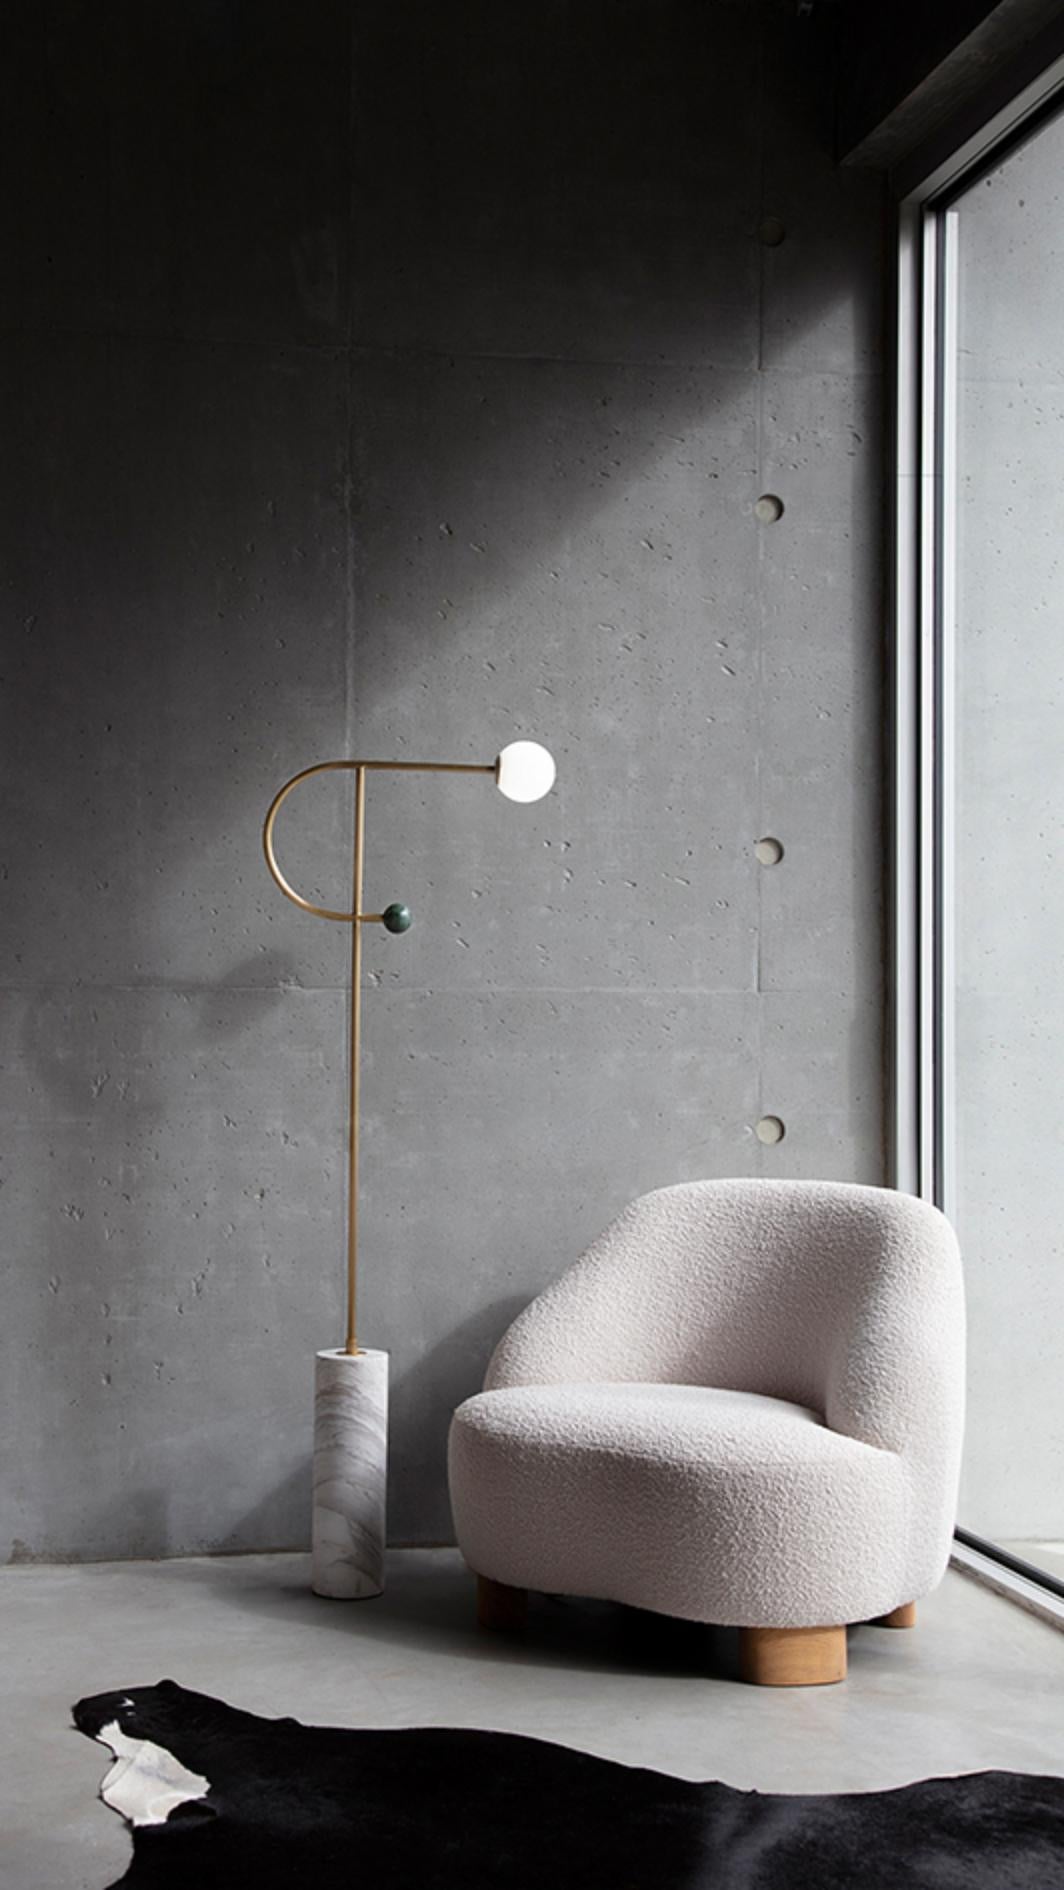 Orb 2 Floor Lamp by Square in Circle
Dimensions: H 165 x W 58 cm
Globe diameter 15 cm
Materials: brushed brass finish, white marble, green marble, opaque white globe

A statement floor lamp with a thin metal frame, a glass globe on one end and a